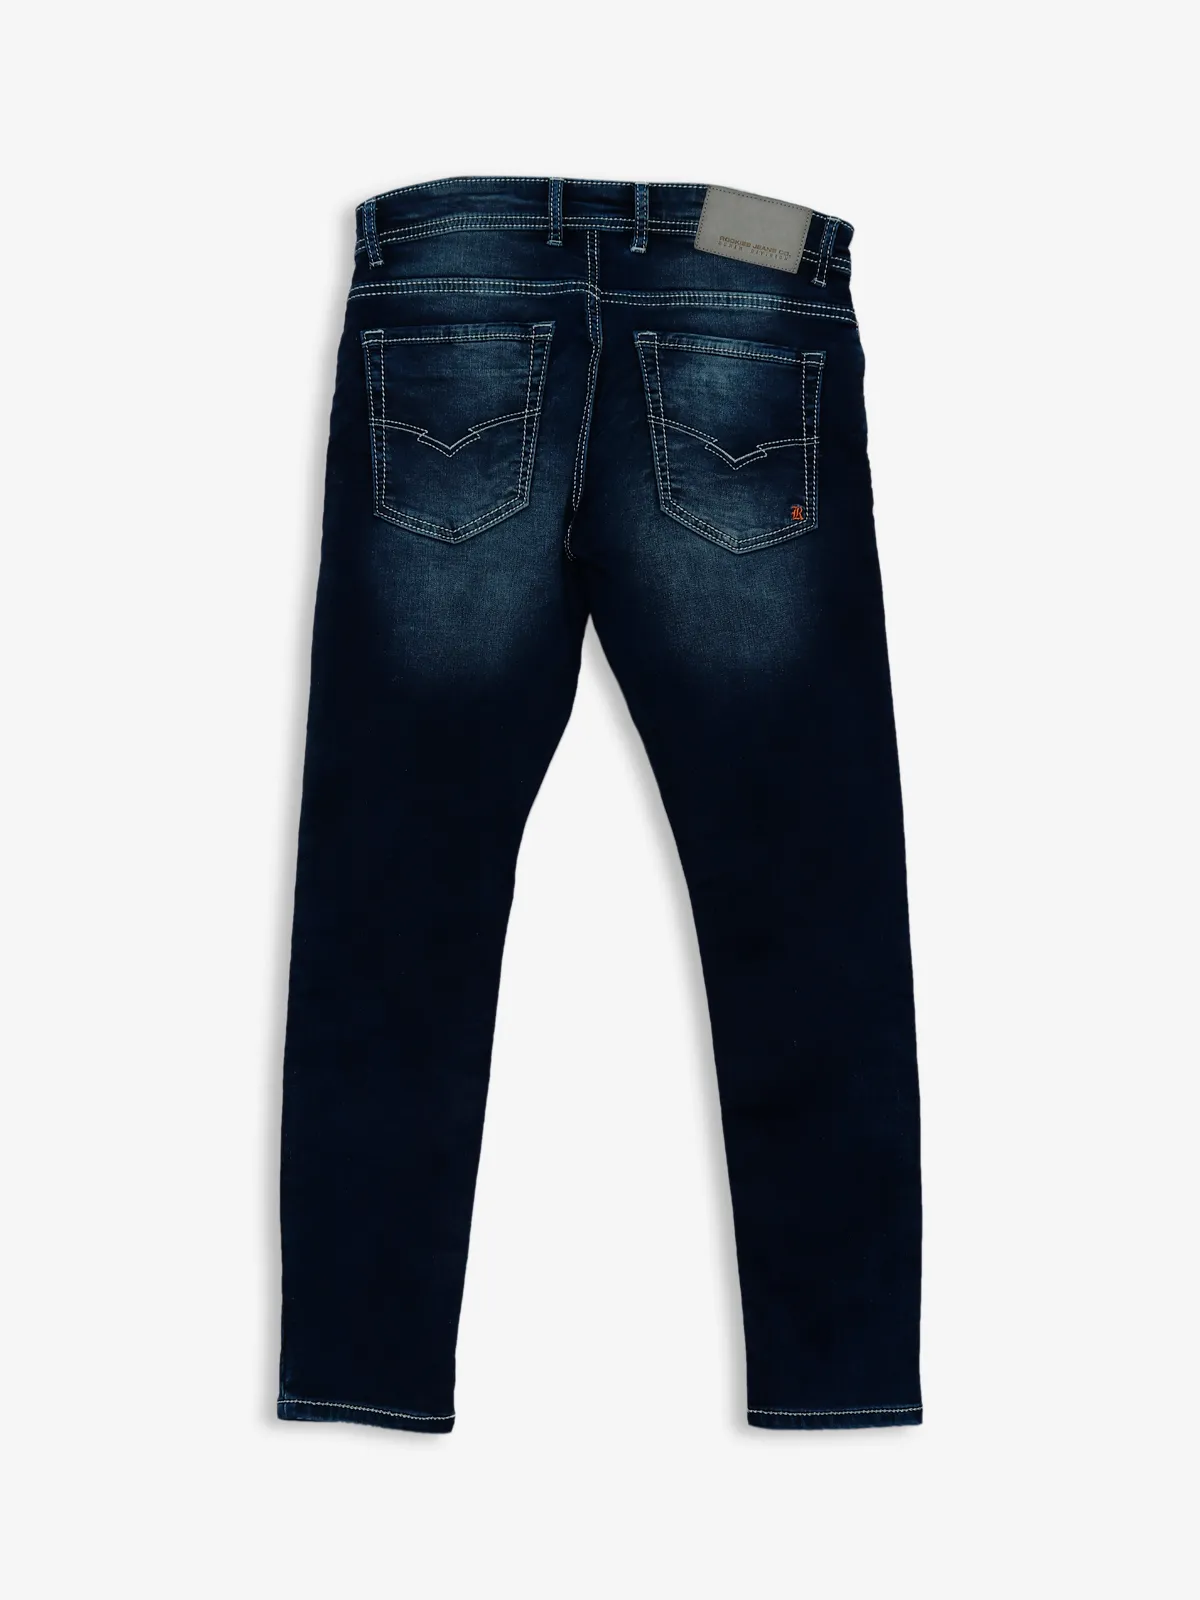 Rookies dark navy washed springsteen fit jeans